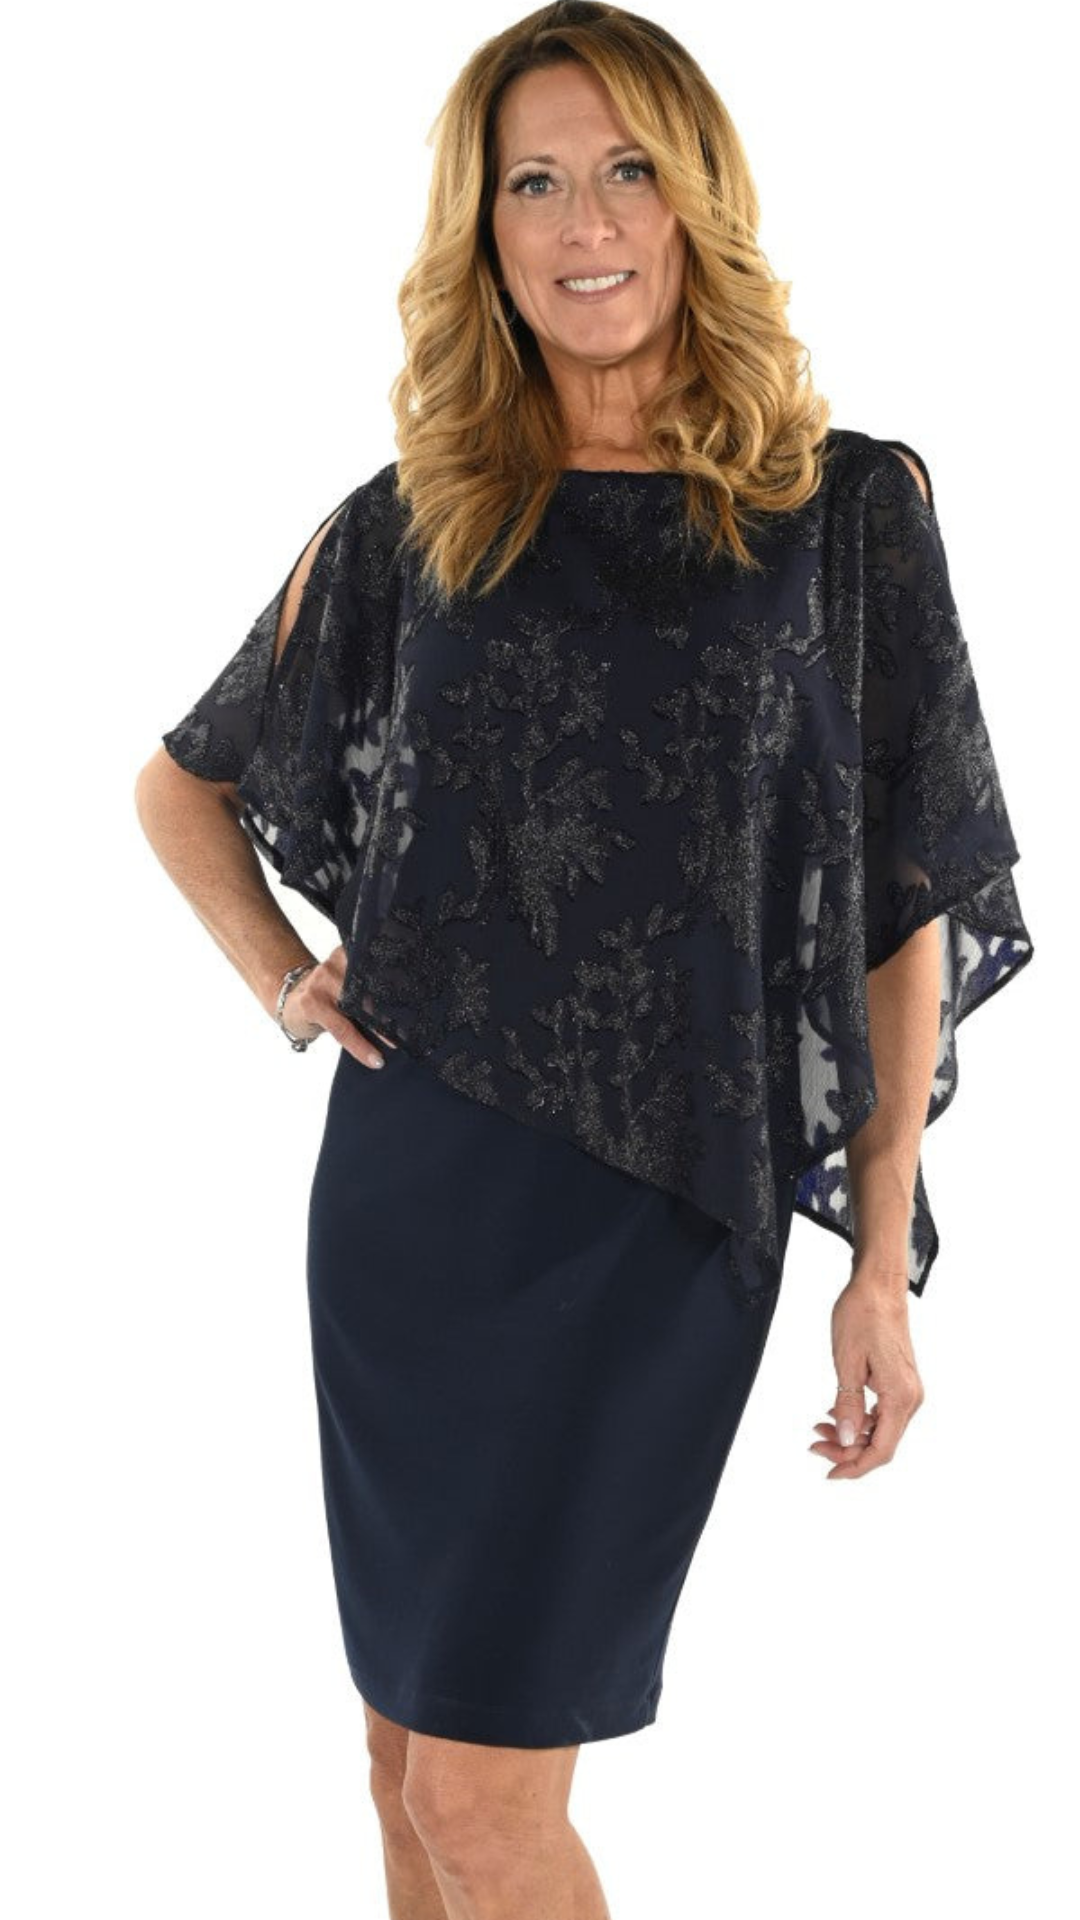 Sheer Floral Printed Cape Overlay Dress. Style FL234388